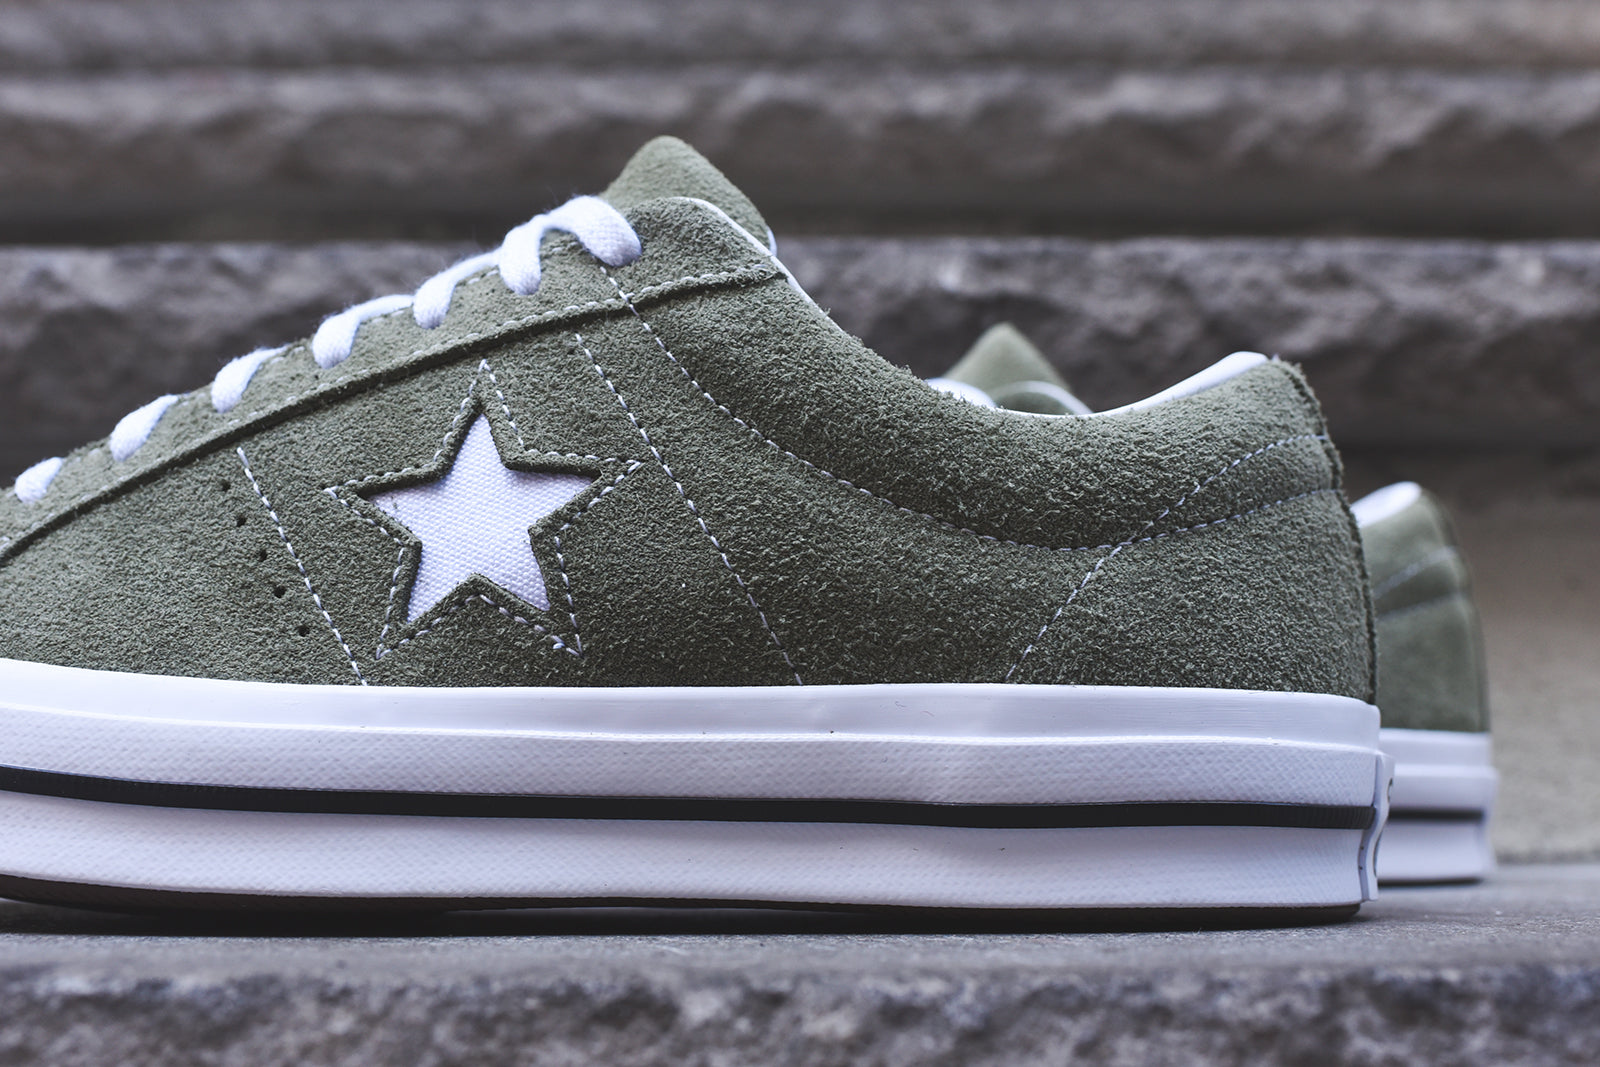 converse one star olive